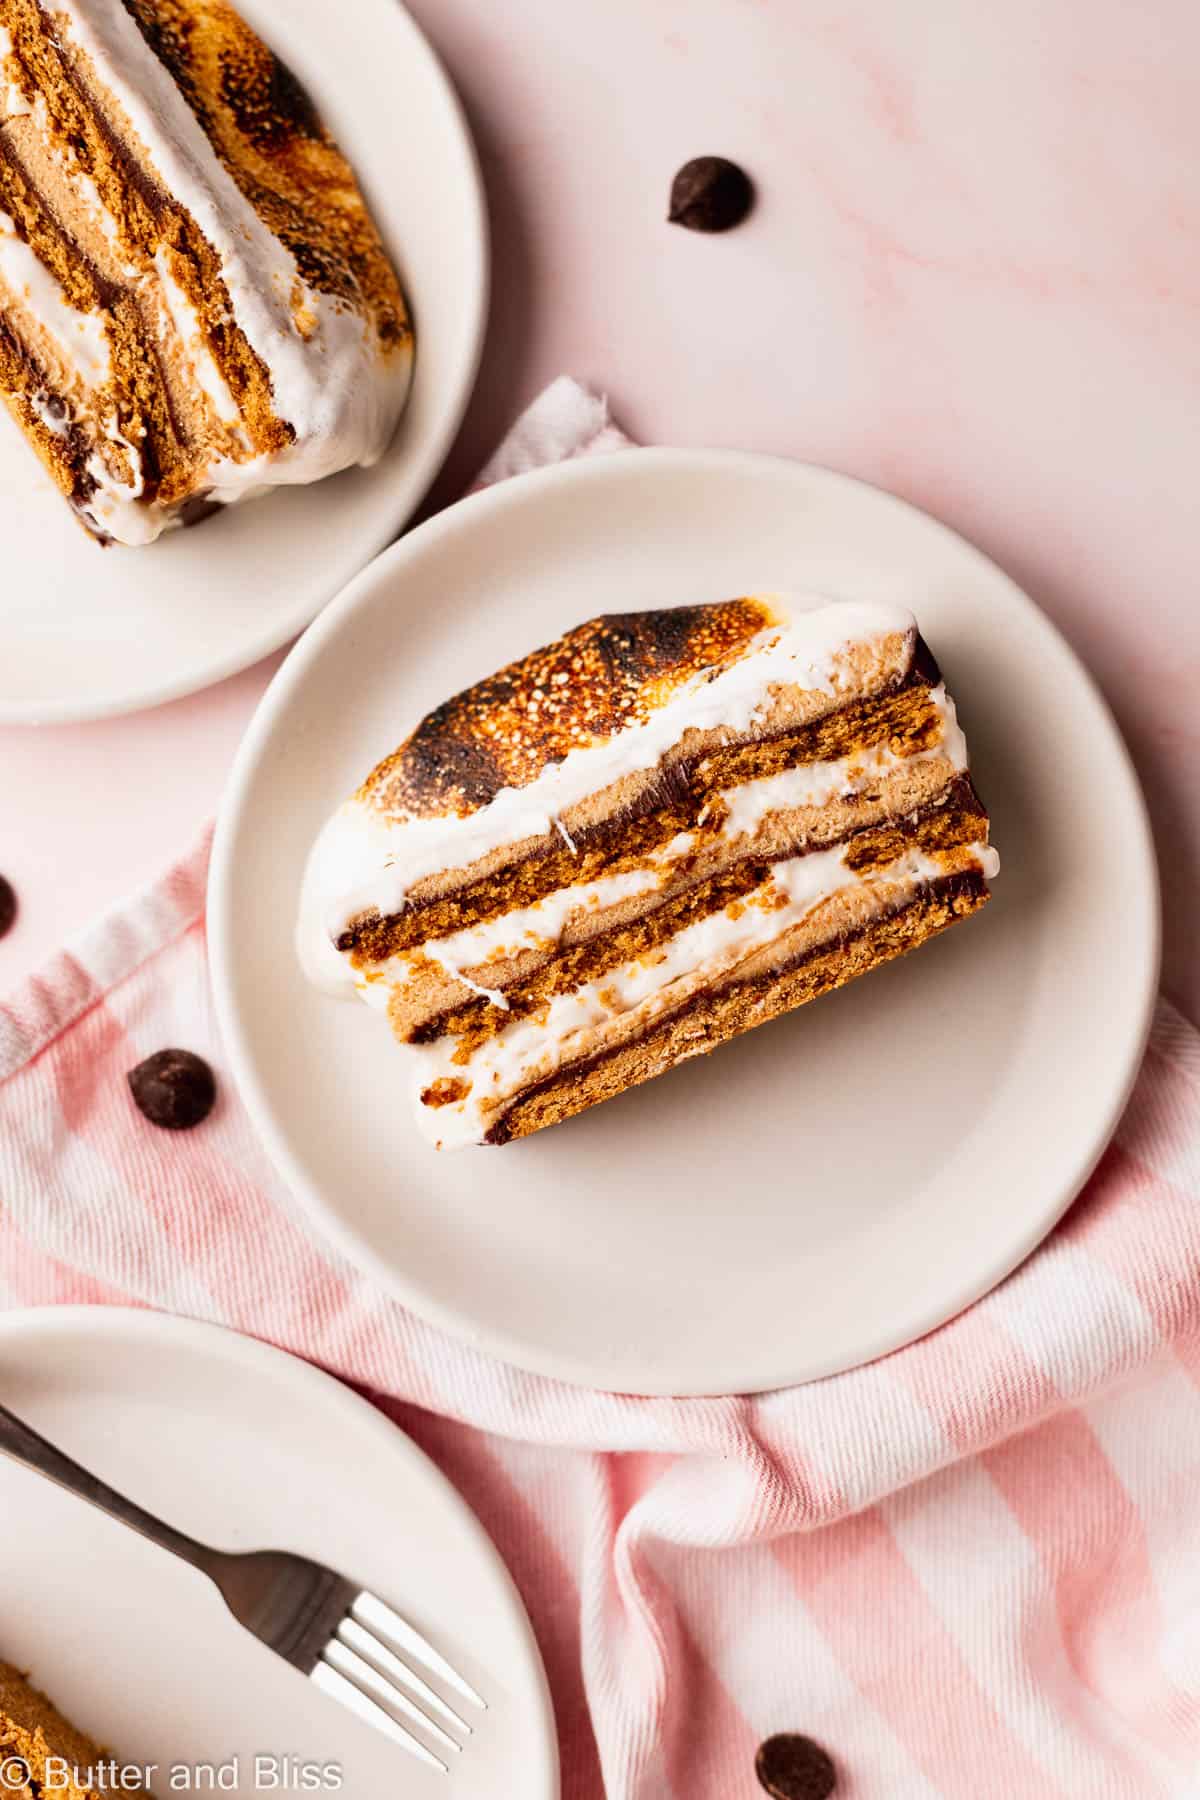 Pretty slice of gluten free s'mores icebox cake on a white plate.